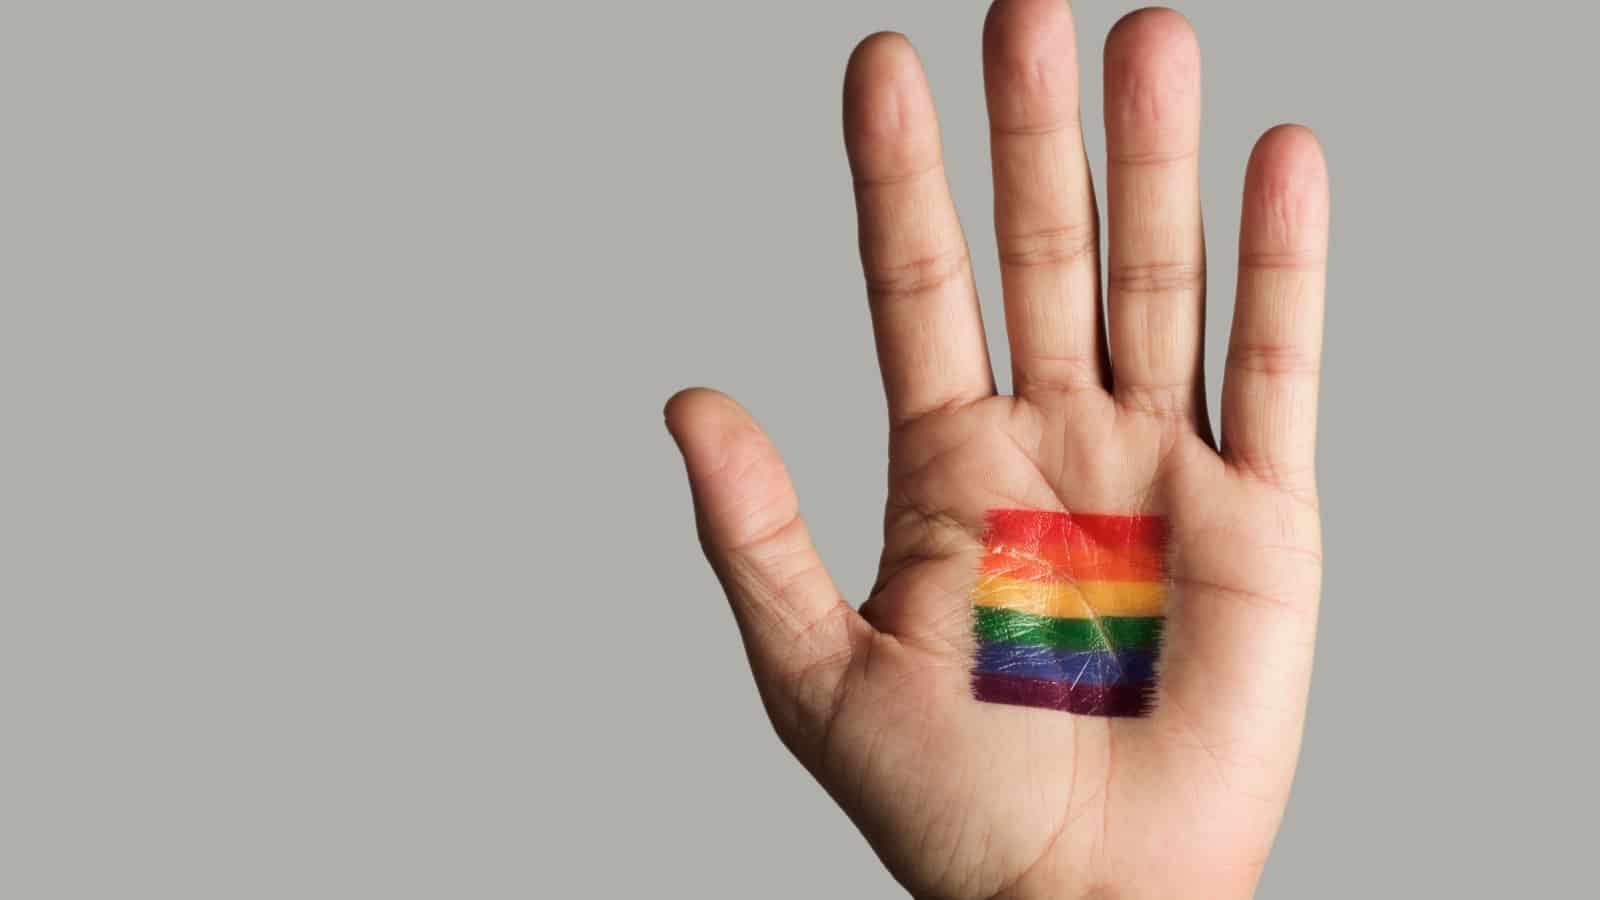 closeup of a rainbow flag in the palm of the hand of a young caucasian person, against an off-white background with some blank space on the left